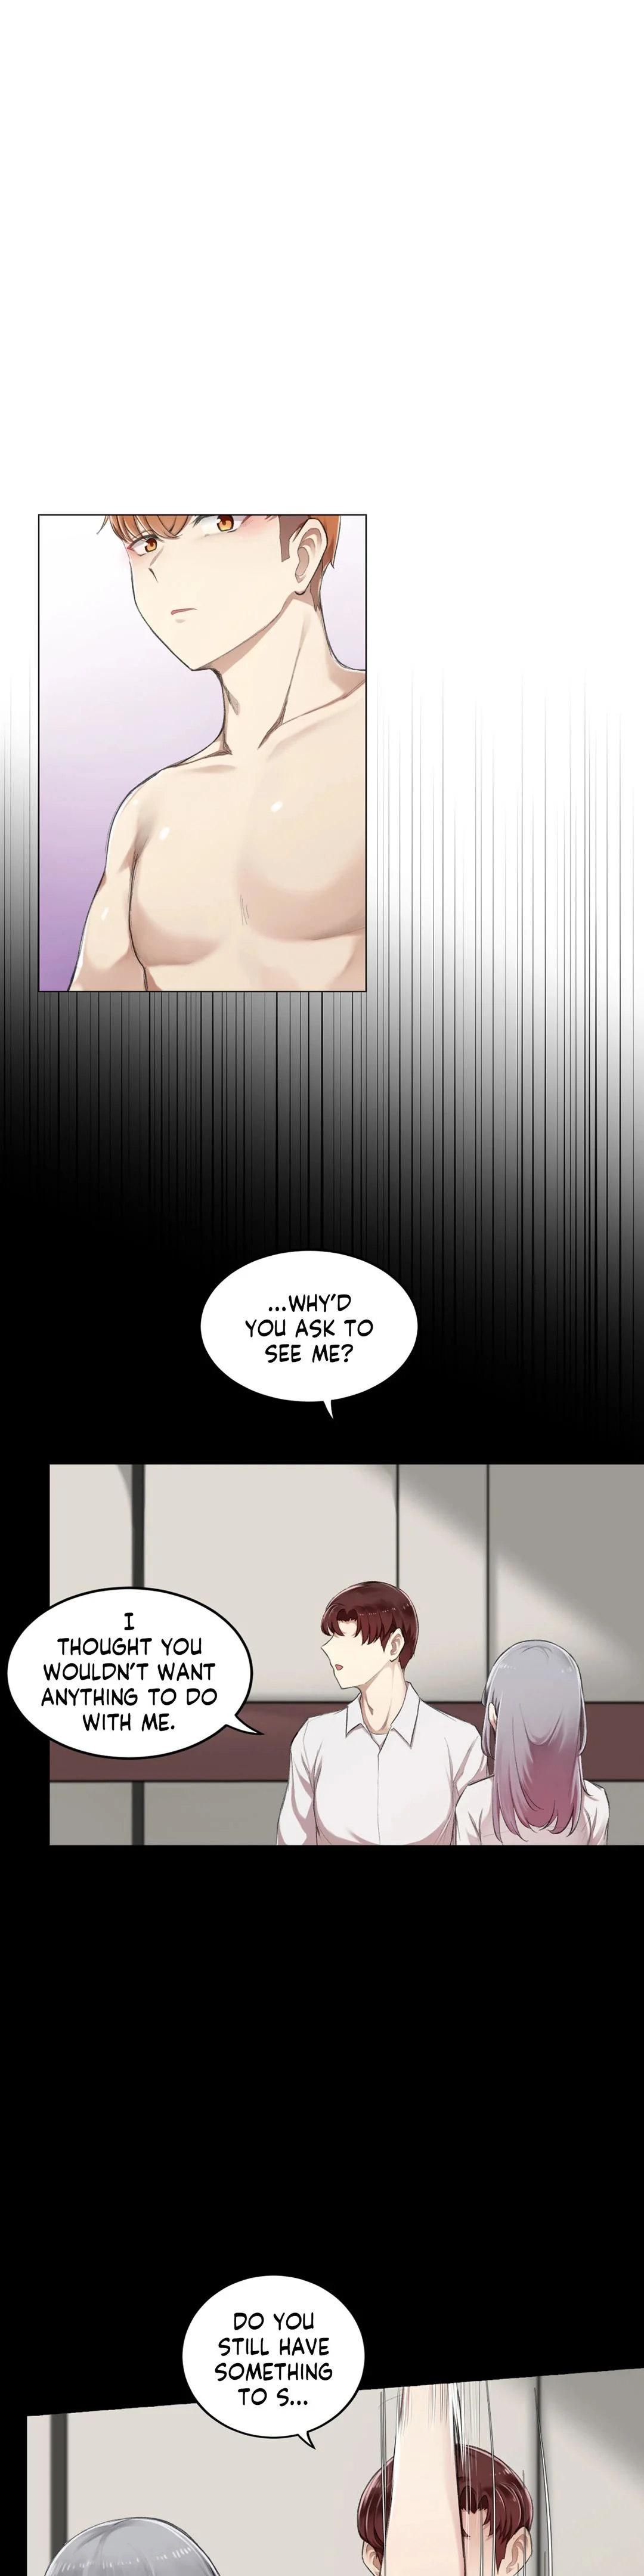 [Dumangoon, KONG_] Sexcape Room: Snap Off Ch.7/7 [English] [Manhwa PDF] Completed 183